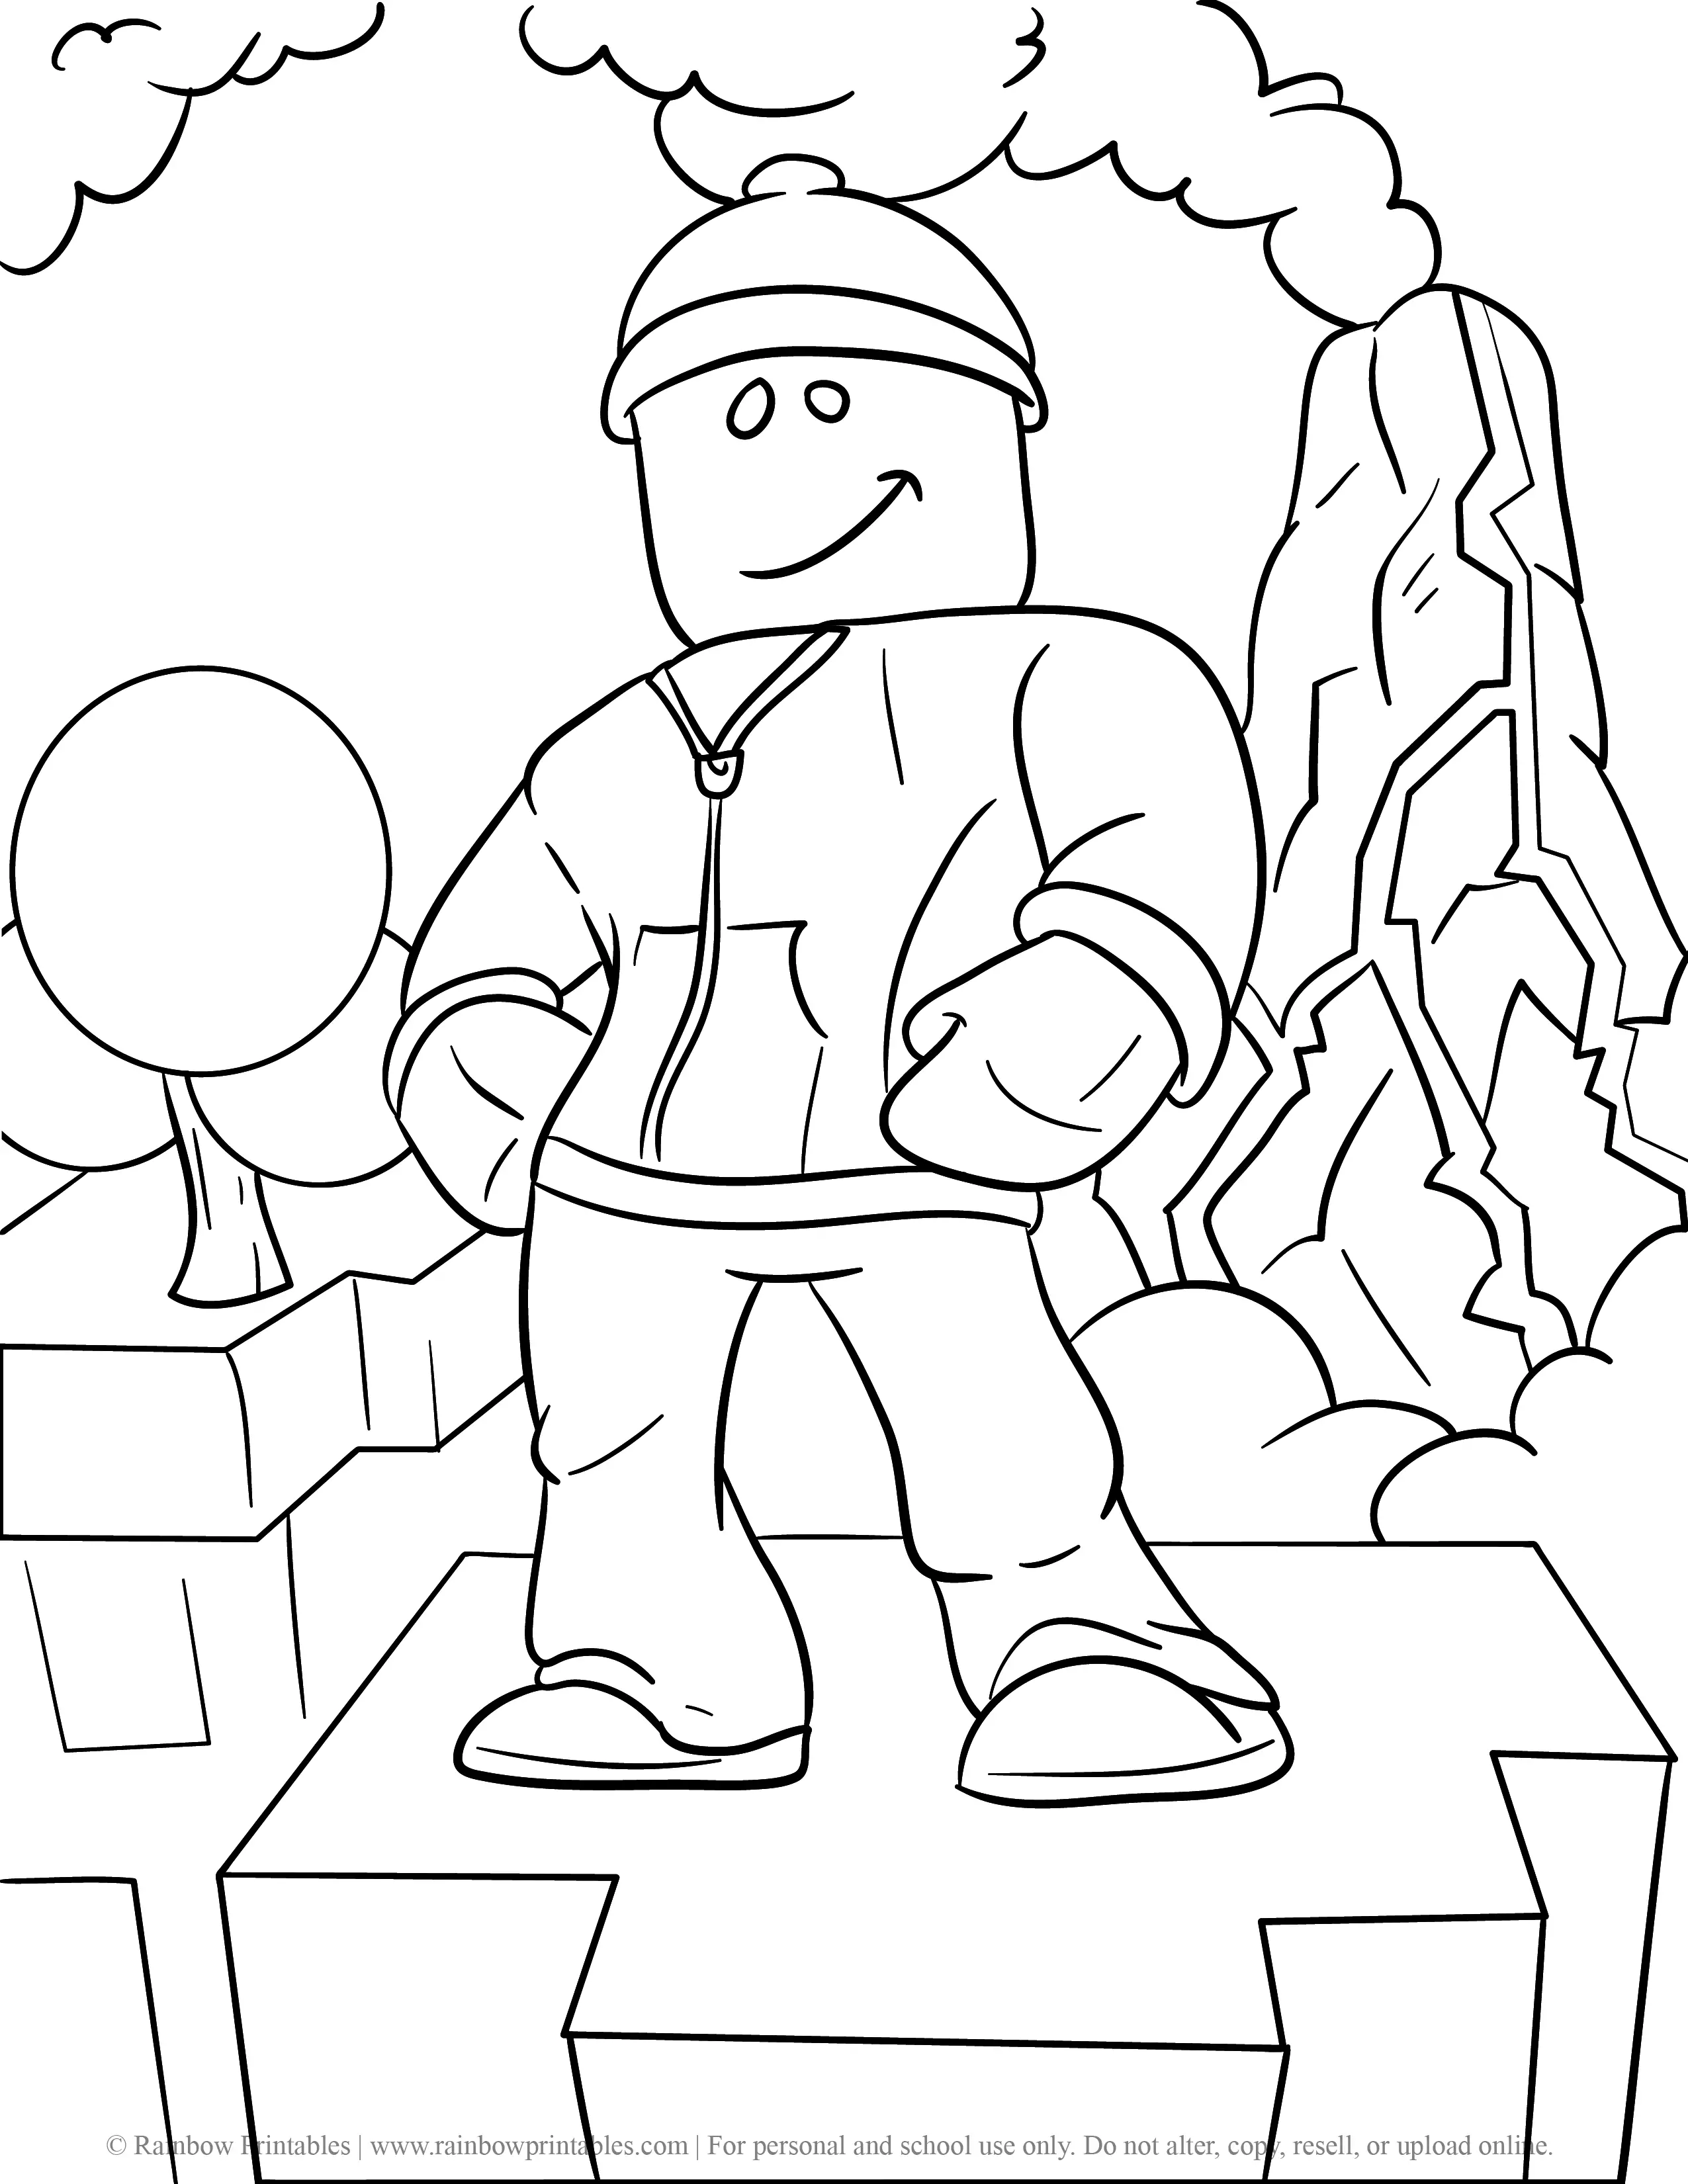 3 Free Roblox Character Inspired Coloring Pages for Kids Rainbow